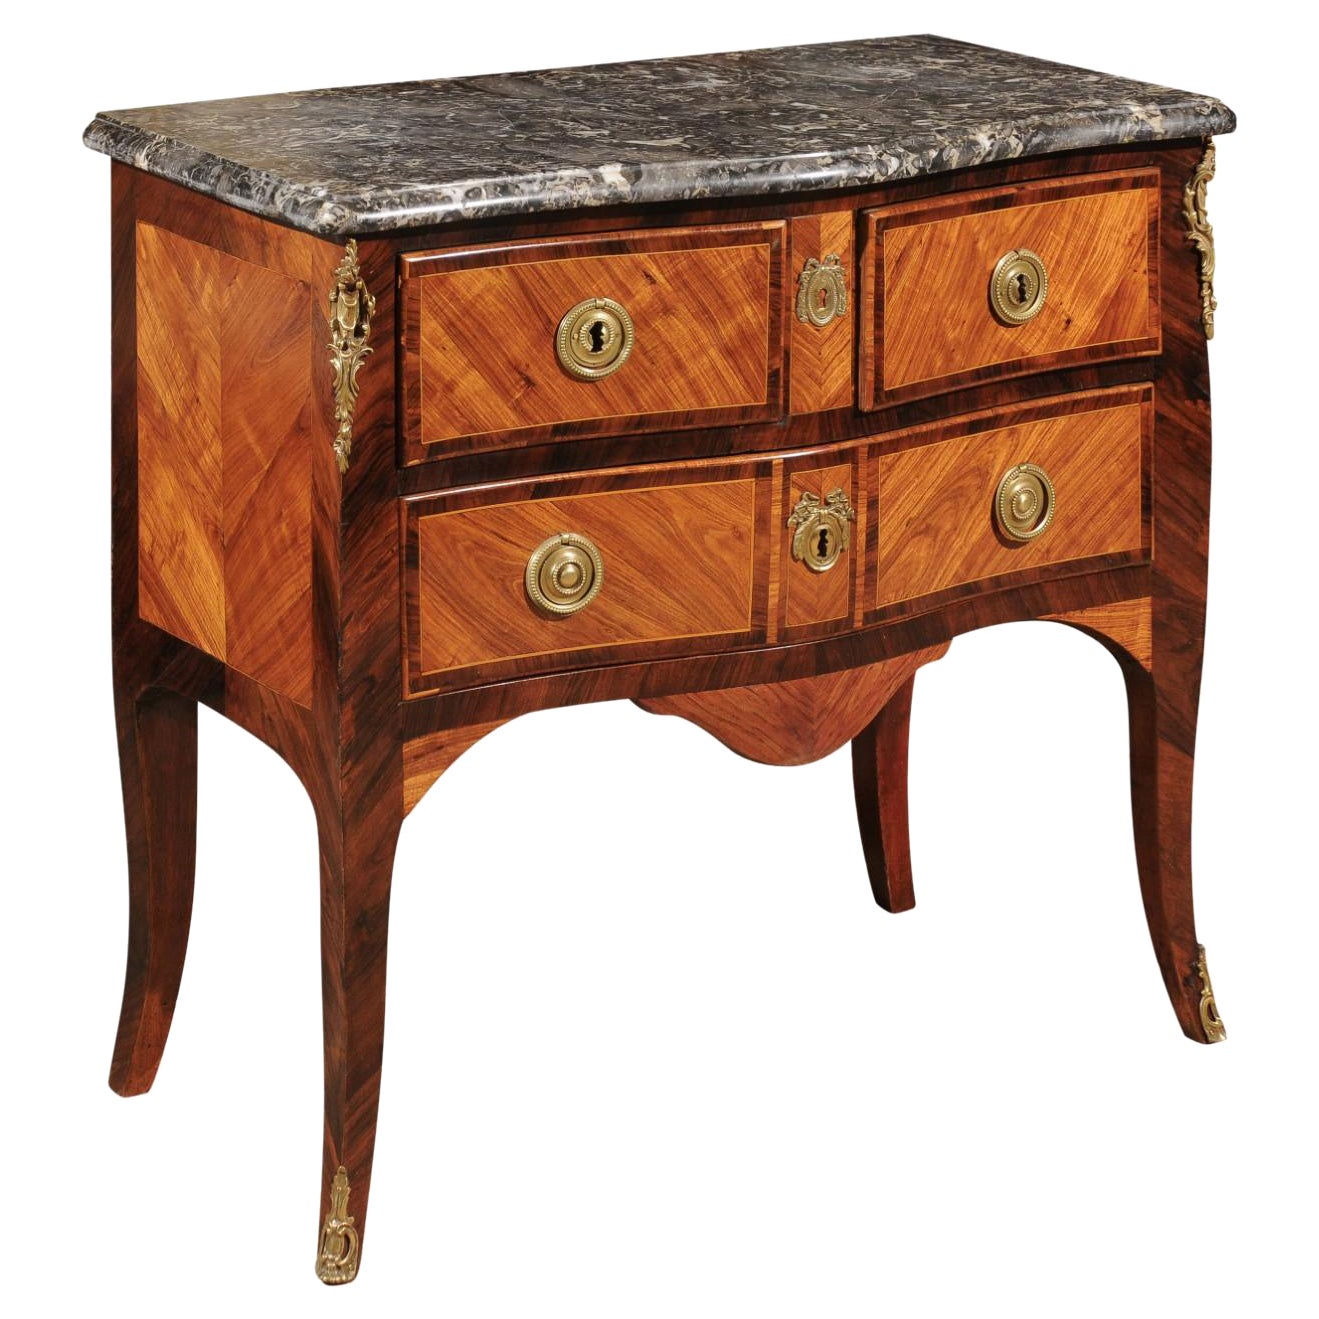 Petite Louis XV Period Commode in Tulipwood with Bronze Dore Mounts & Marble Top